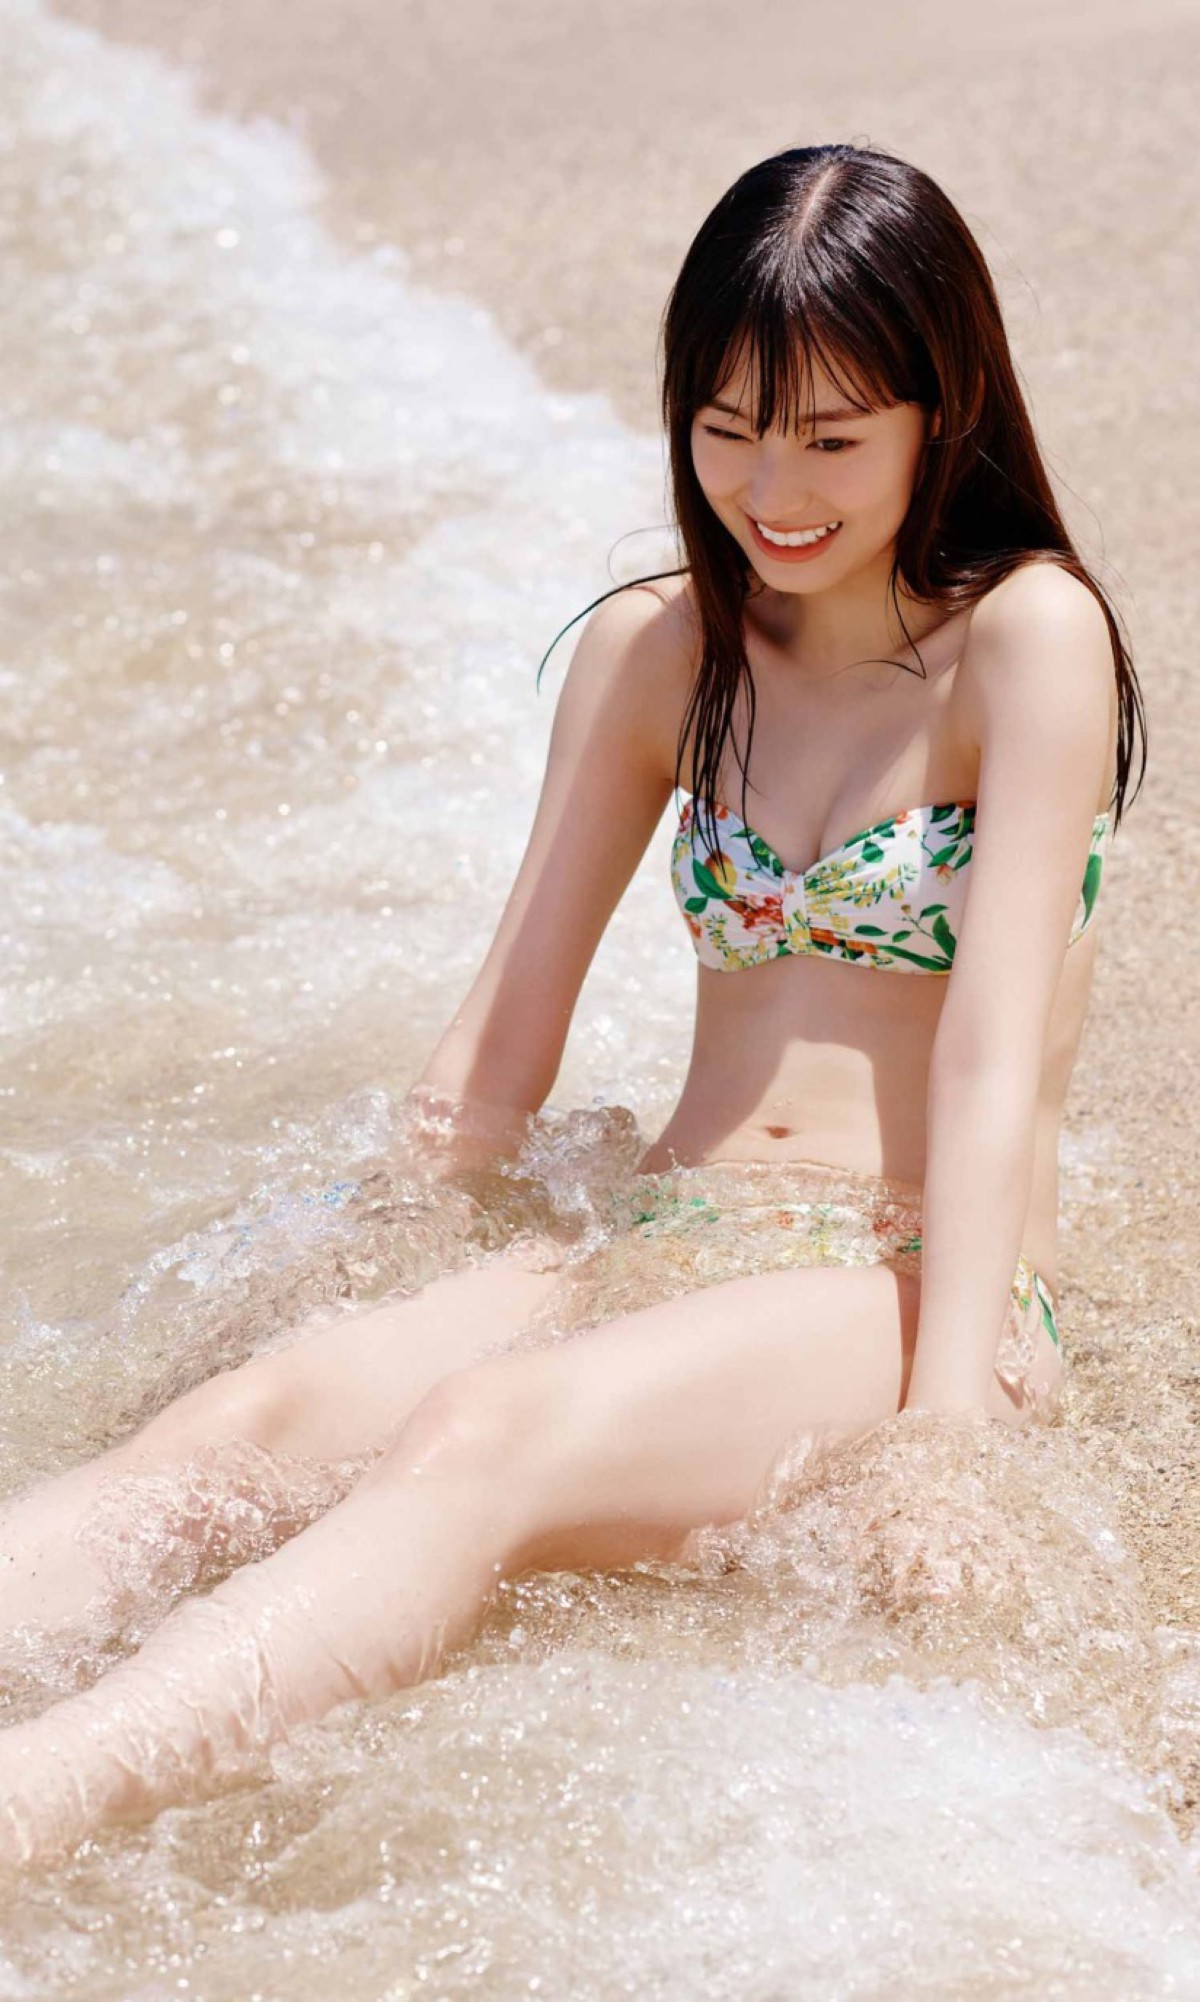 Photobook Ayaka Imoto 井本彩花 The Heroine Is Dignified And Beautiful 17 Years Old 0013 7310893482.jpg